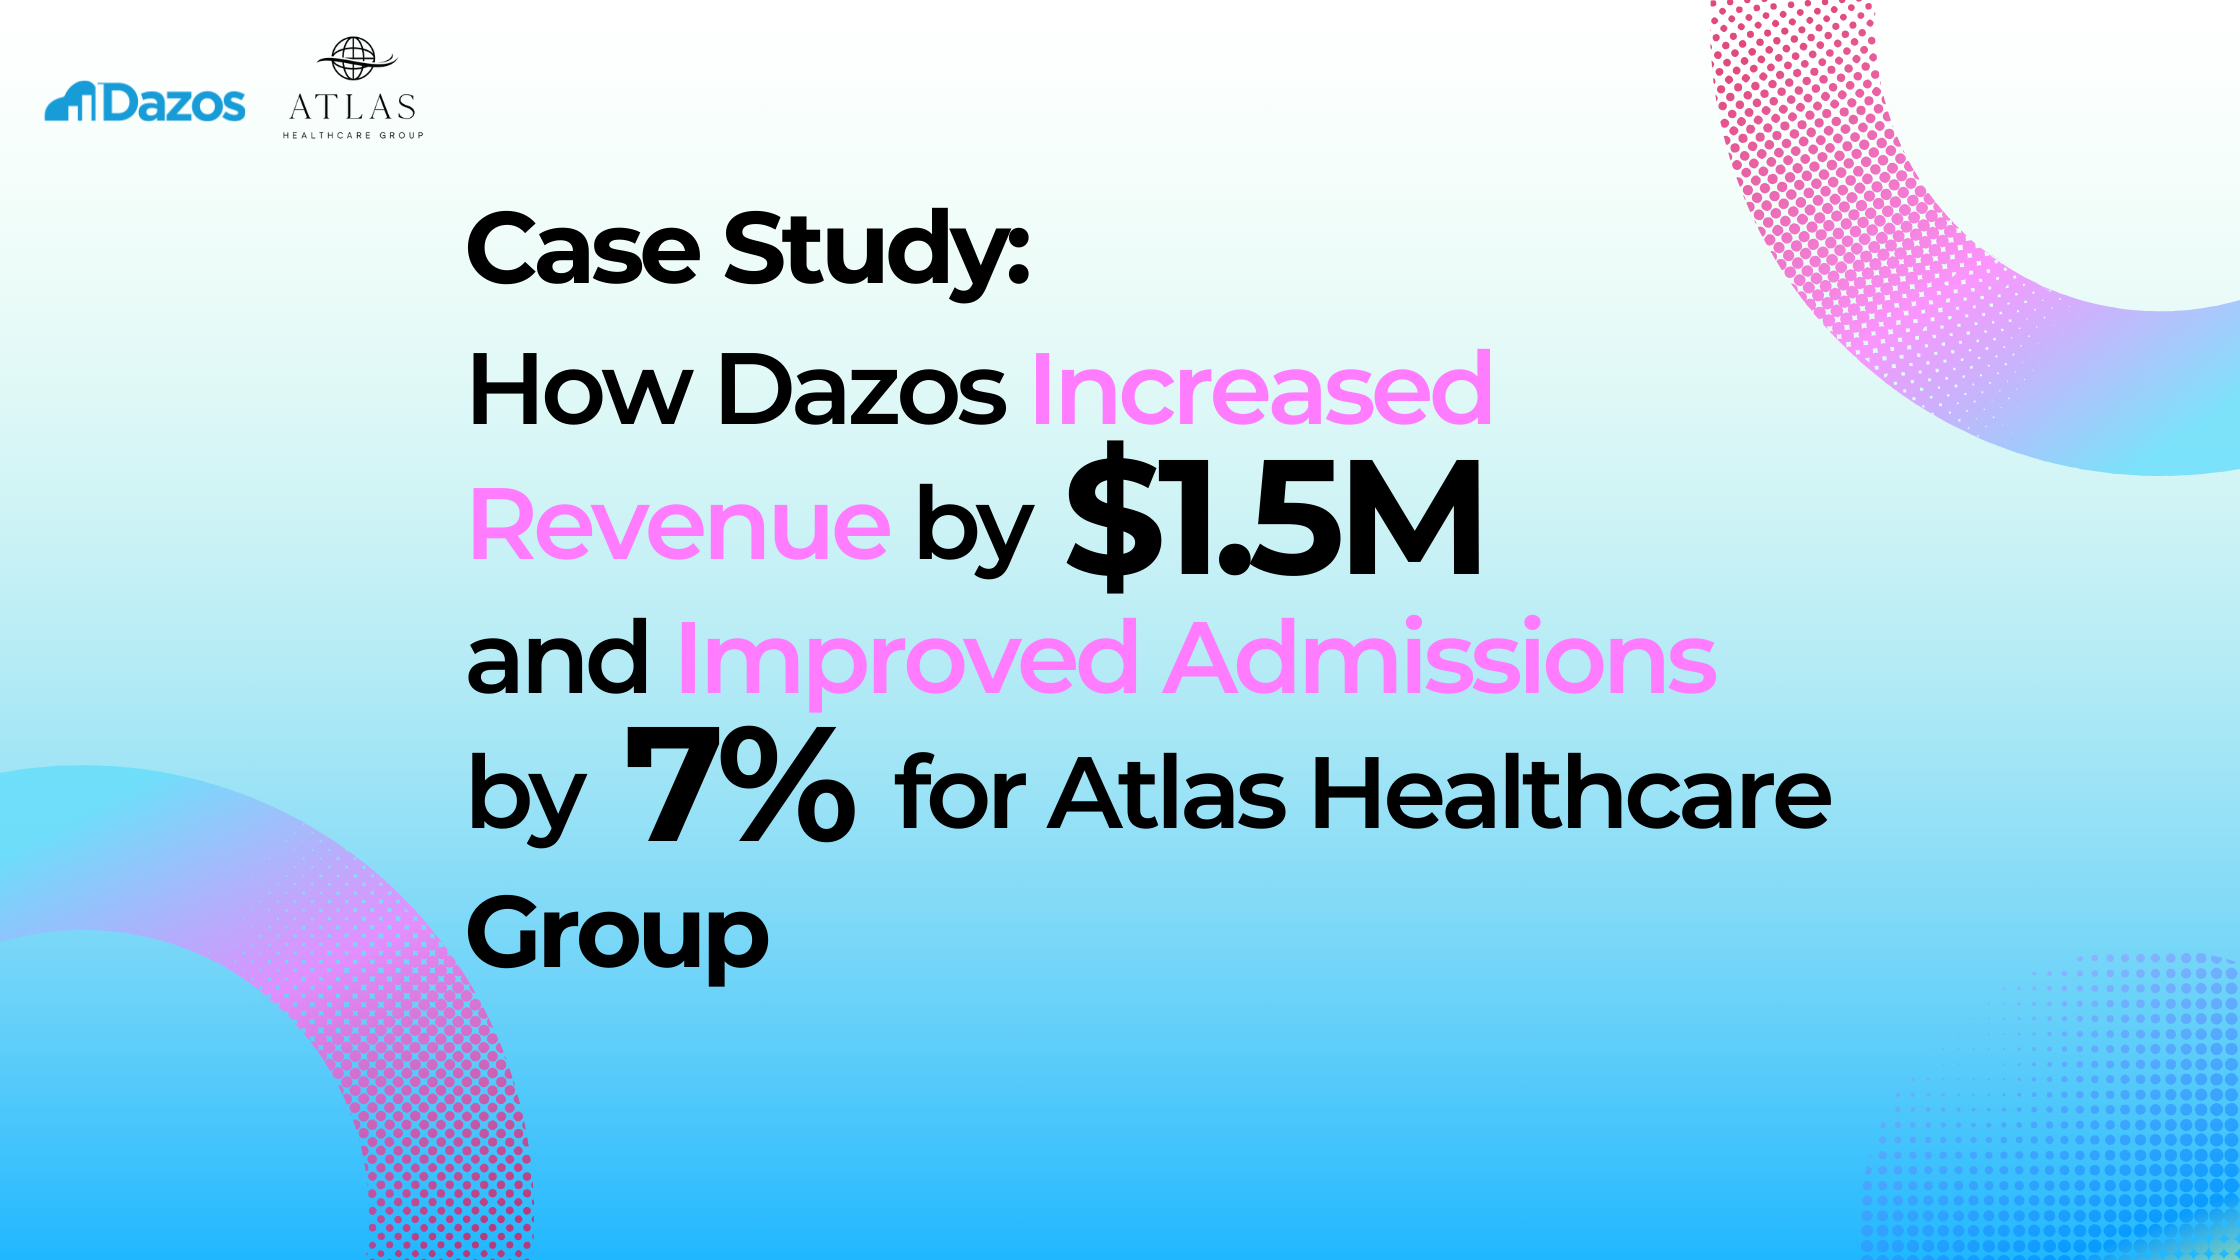 Case study: How Dazos increased revenue by 1.5M and increased admissions by 7% for Atlas Healthcare group